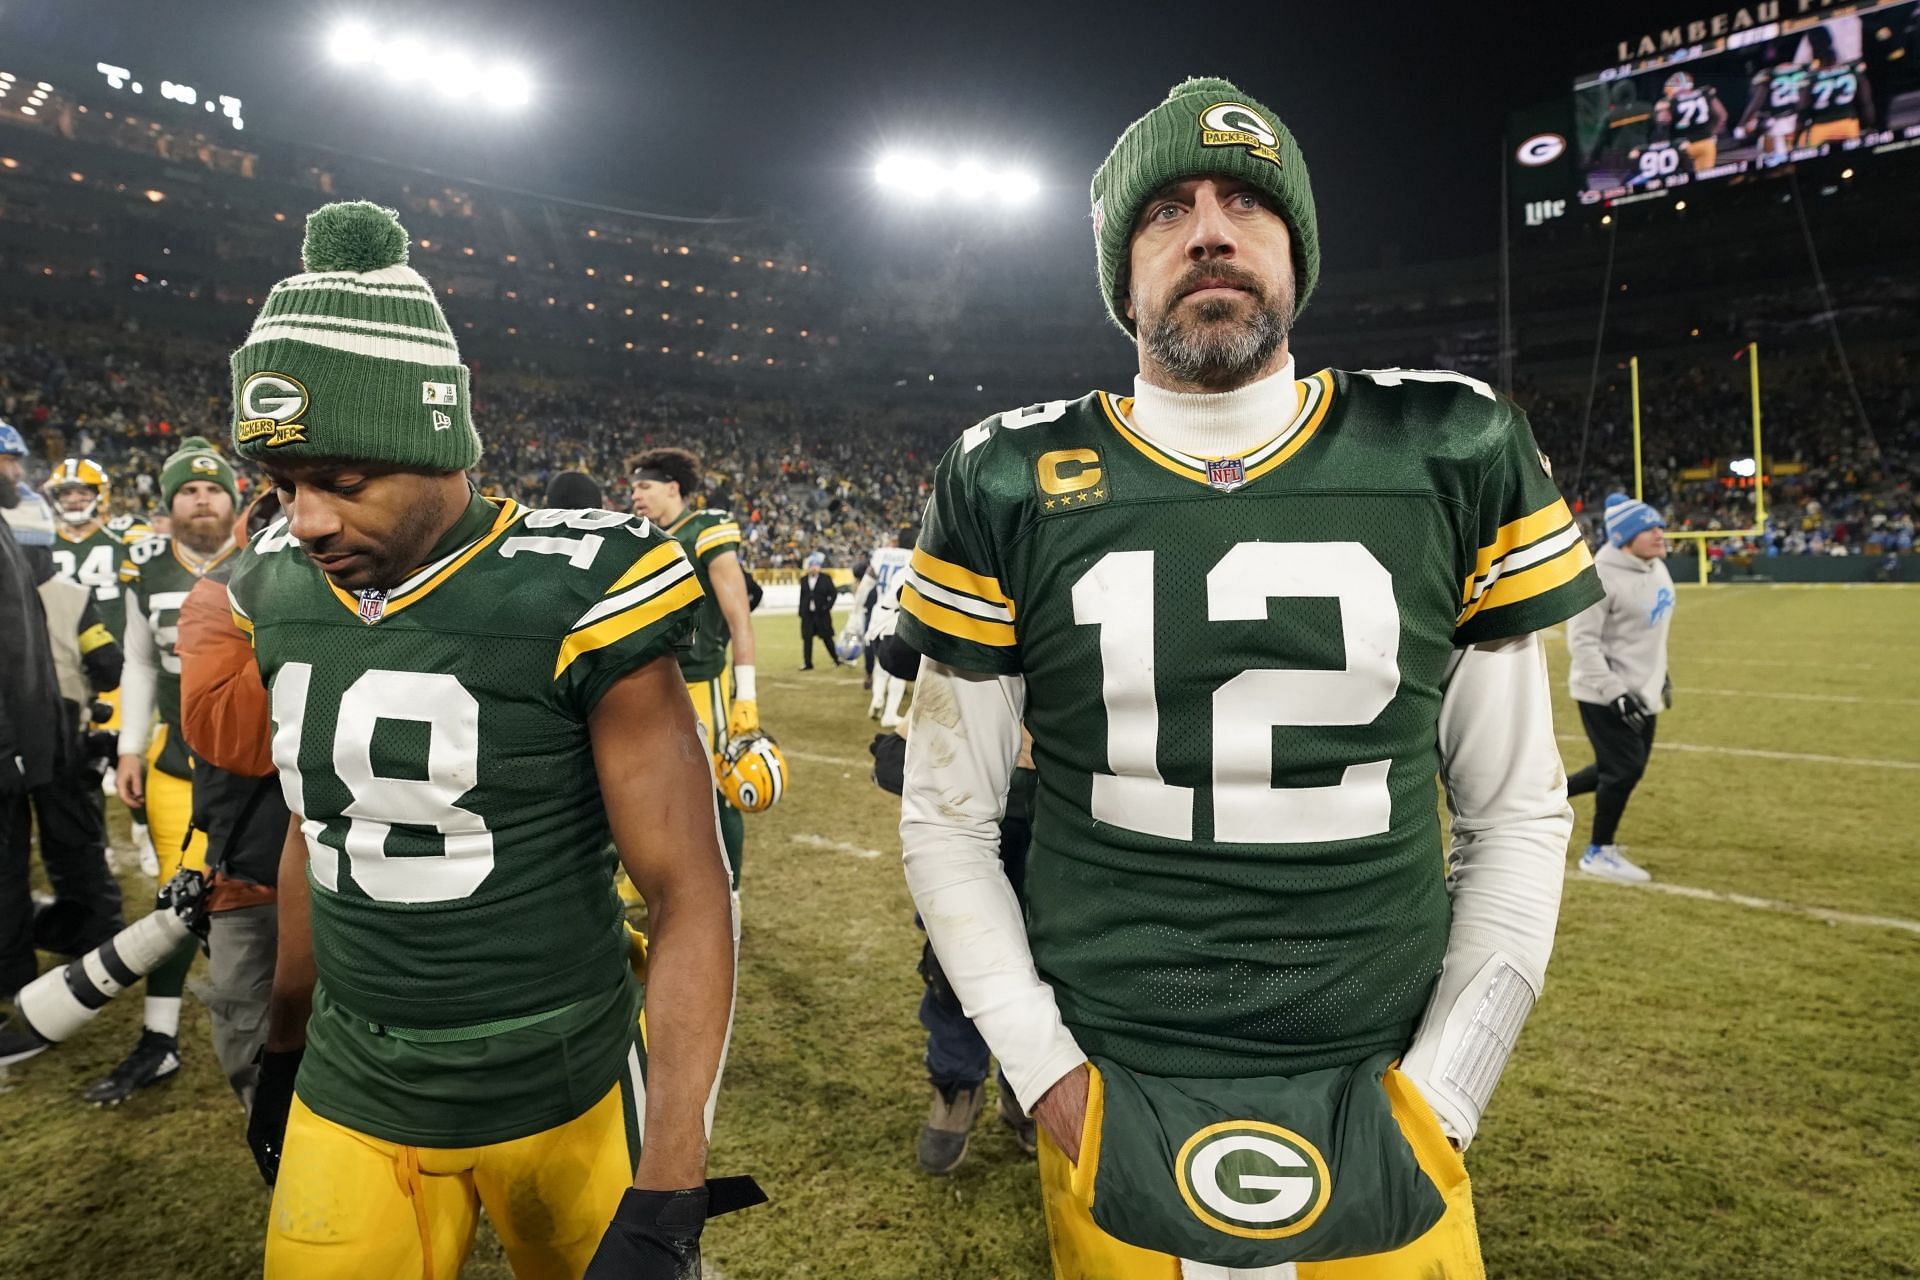 Rodgers (right) at Detroit Lions v Green Bay Packers